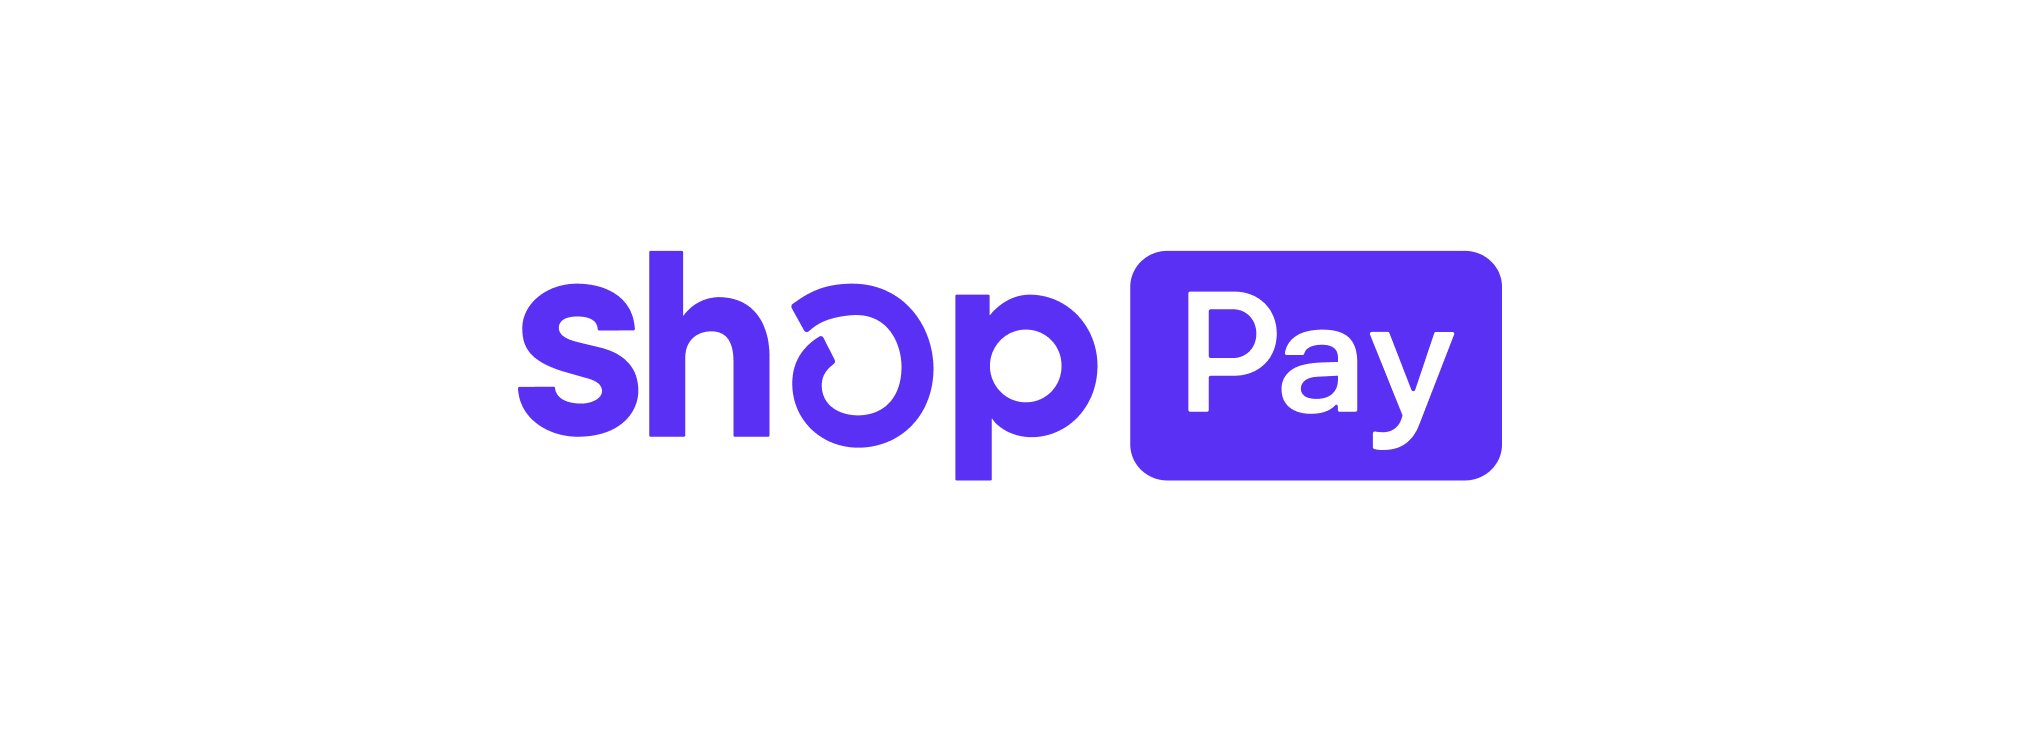 Shop Pay primary logo